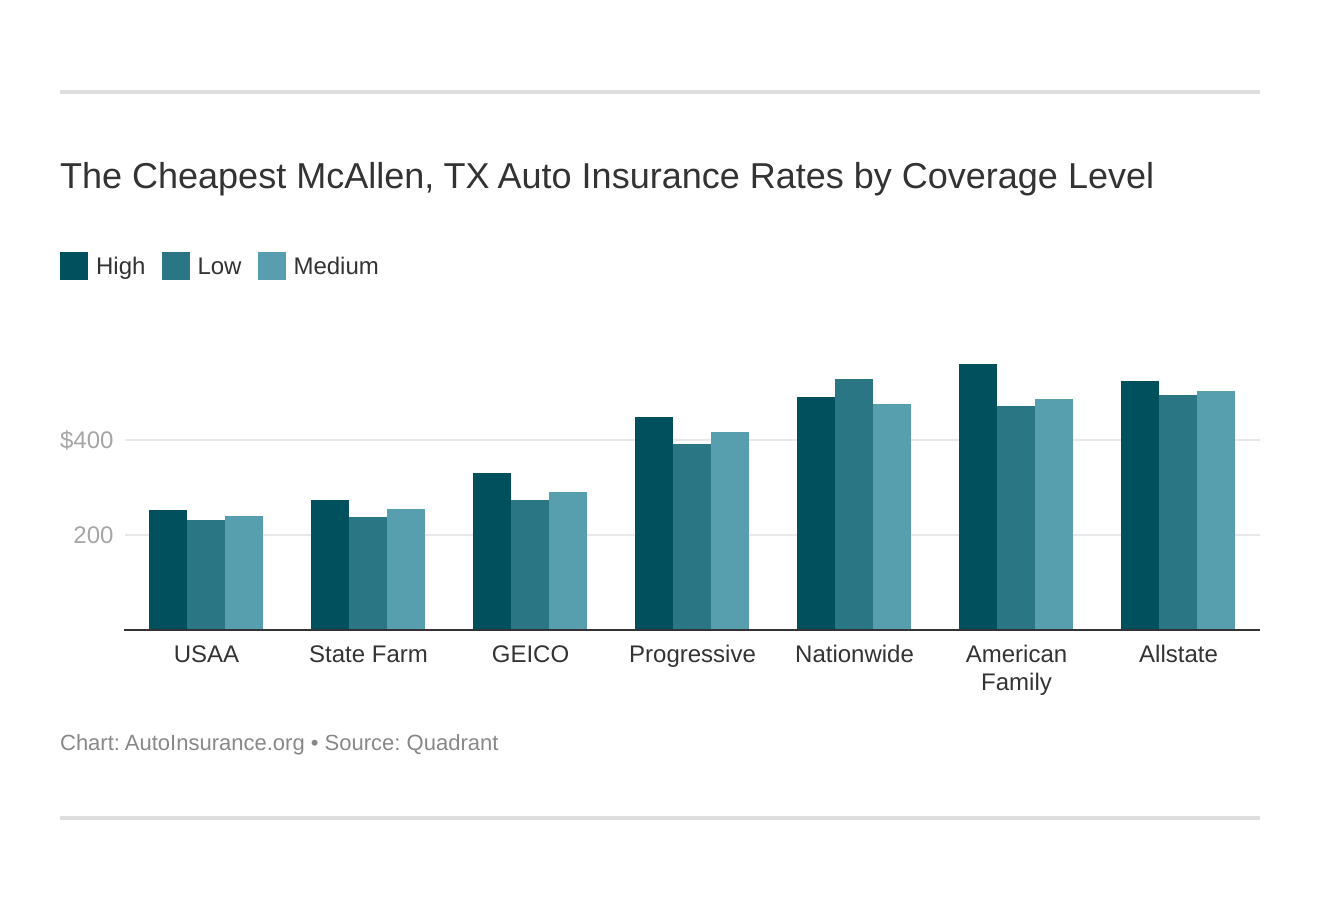 The Cheapest McAllen, TX Auto Insurance Rates by Coverage Level